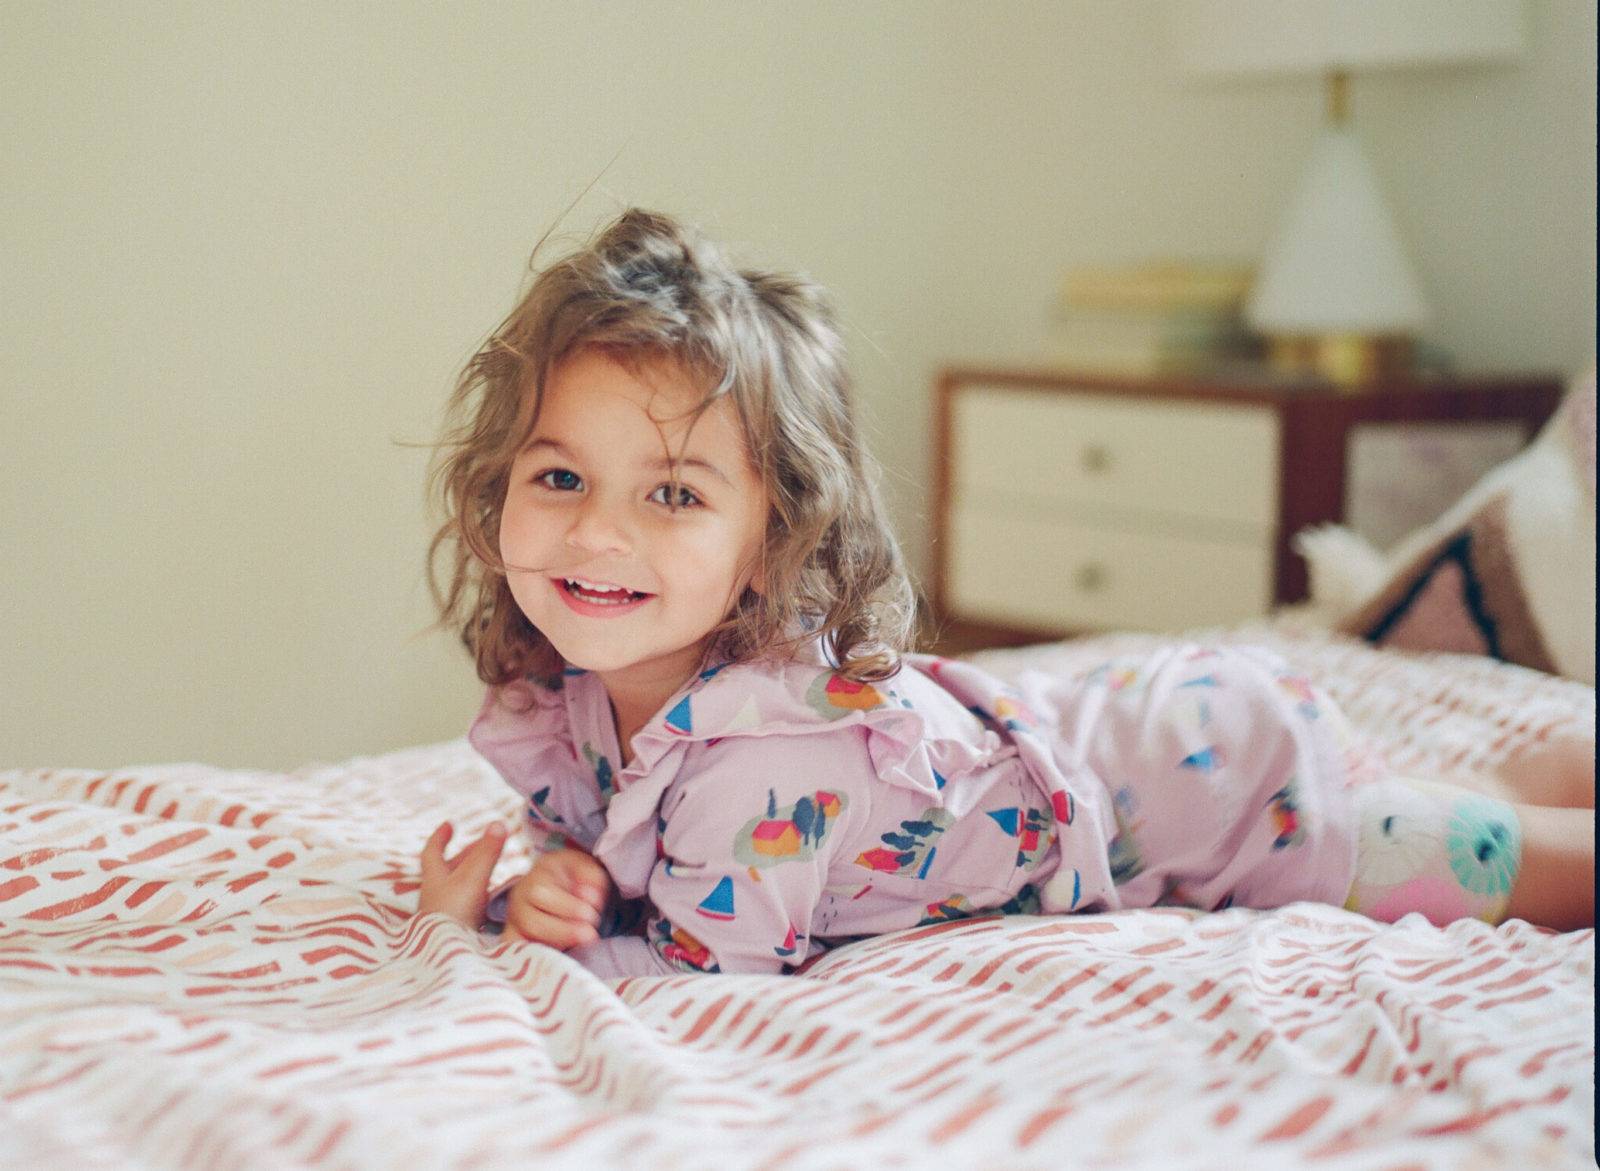 photo of a toddler girl with messy hair lying tummy down on the bed smiling at the camera